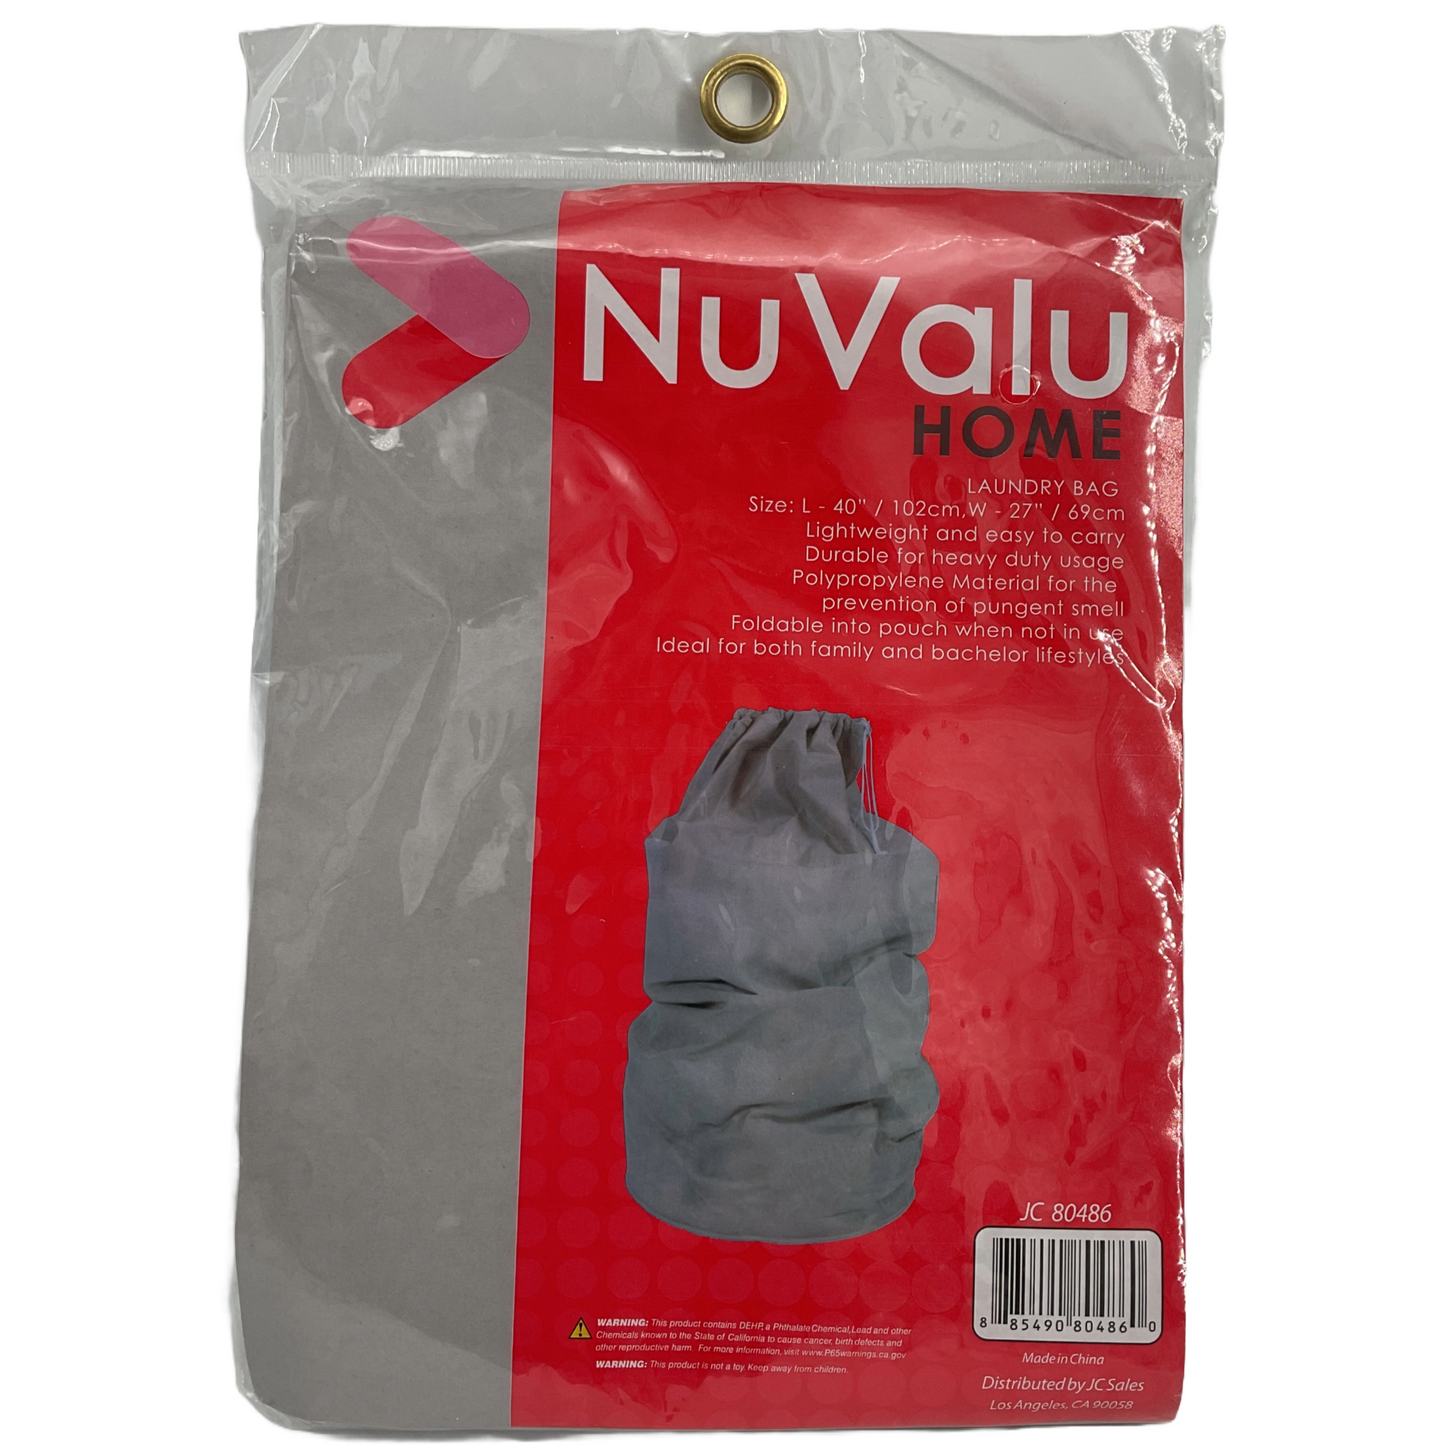 Laundry Bag Size Large (40" x 27") Color Gray by Novalu Home